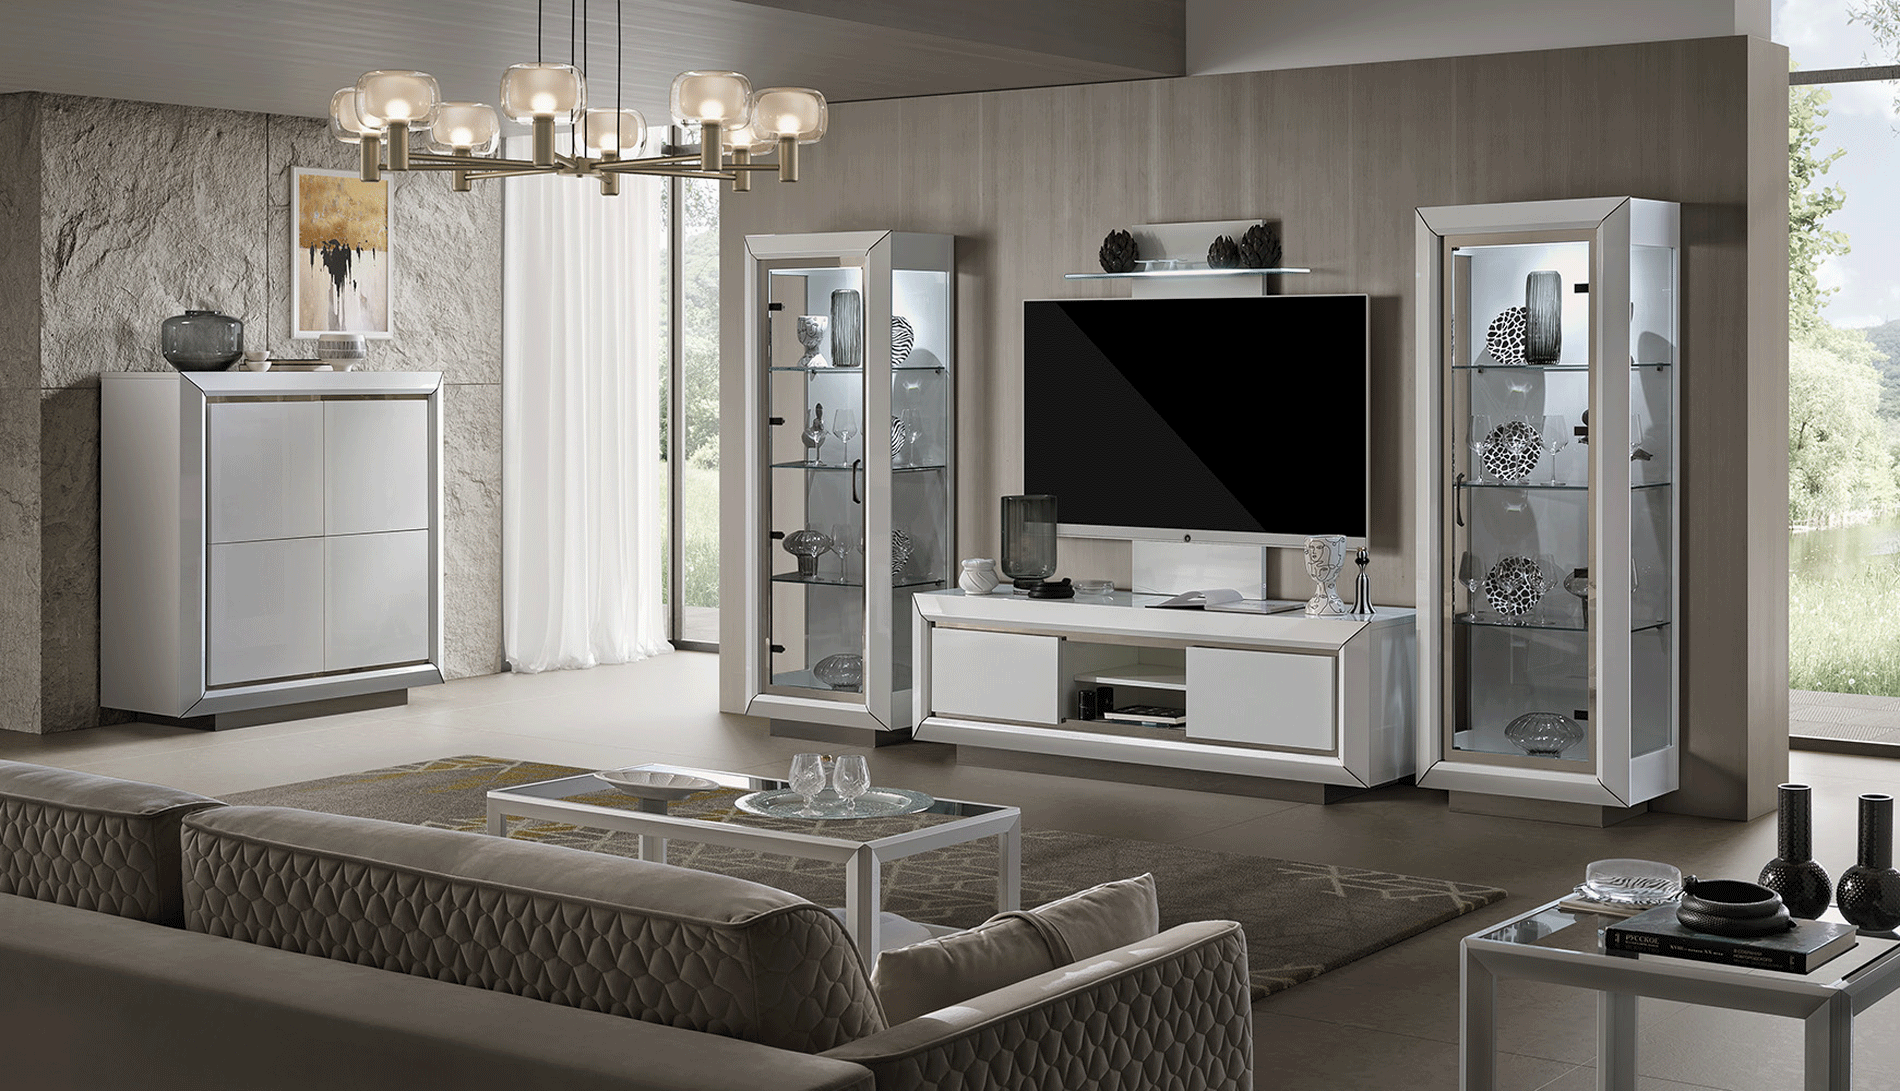 Bedroom Furniture Dressers and Chests Elite WHITE Entertainment center Additional items